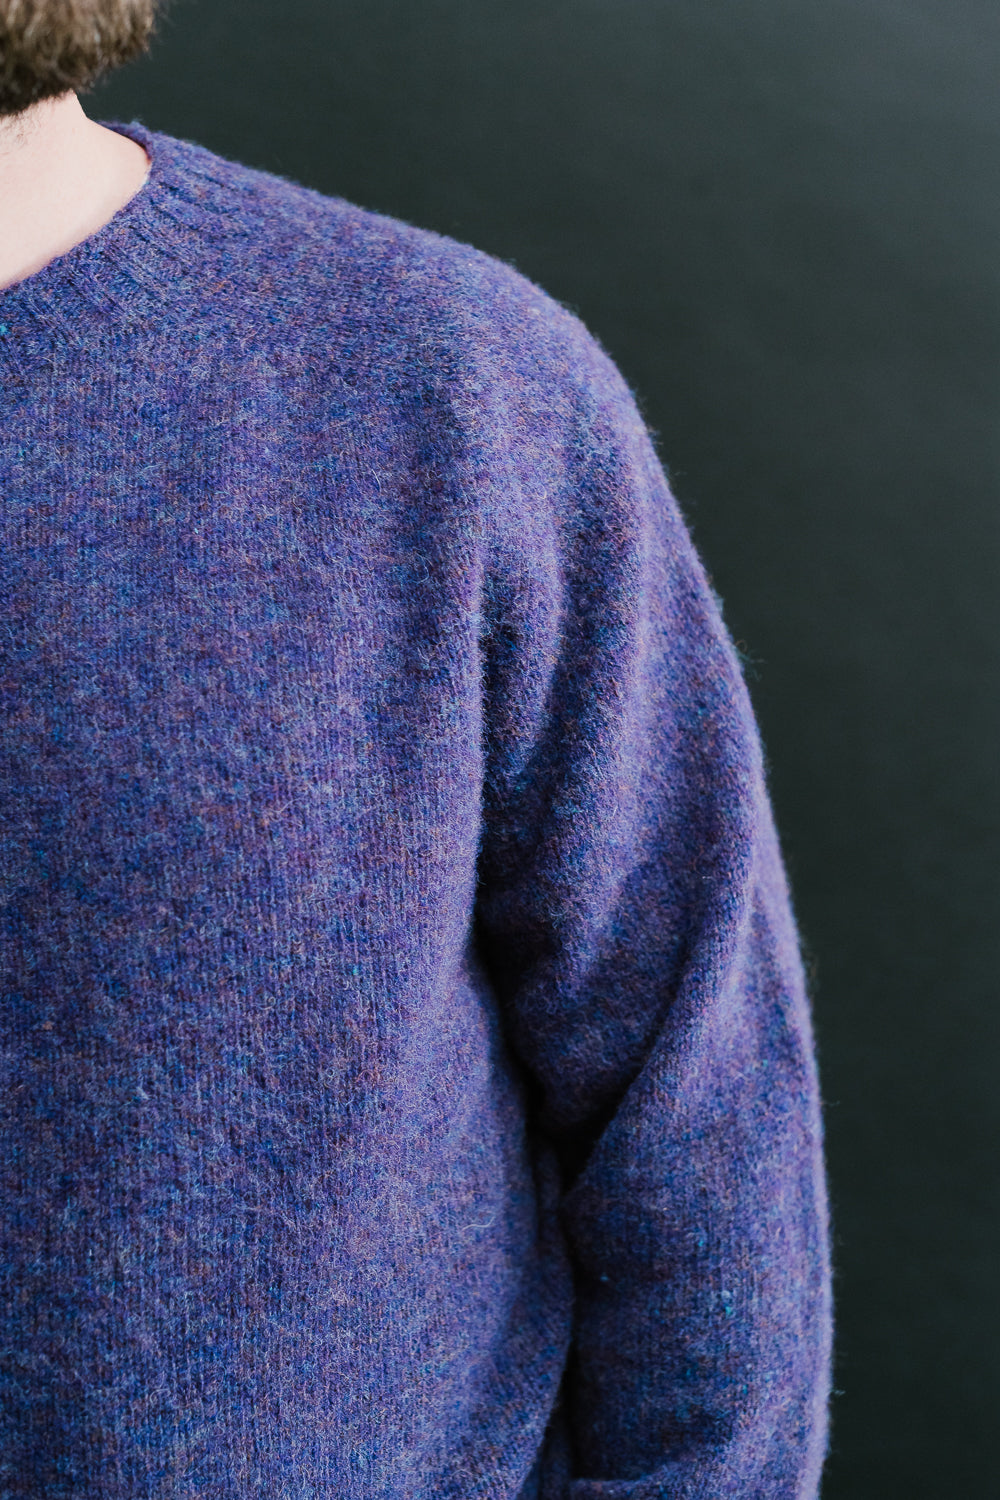 Birth of the Cool Sweater - Lavender